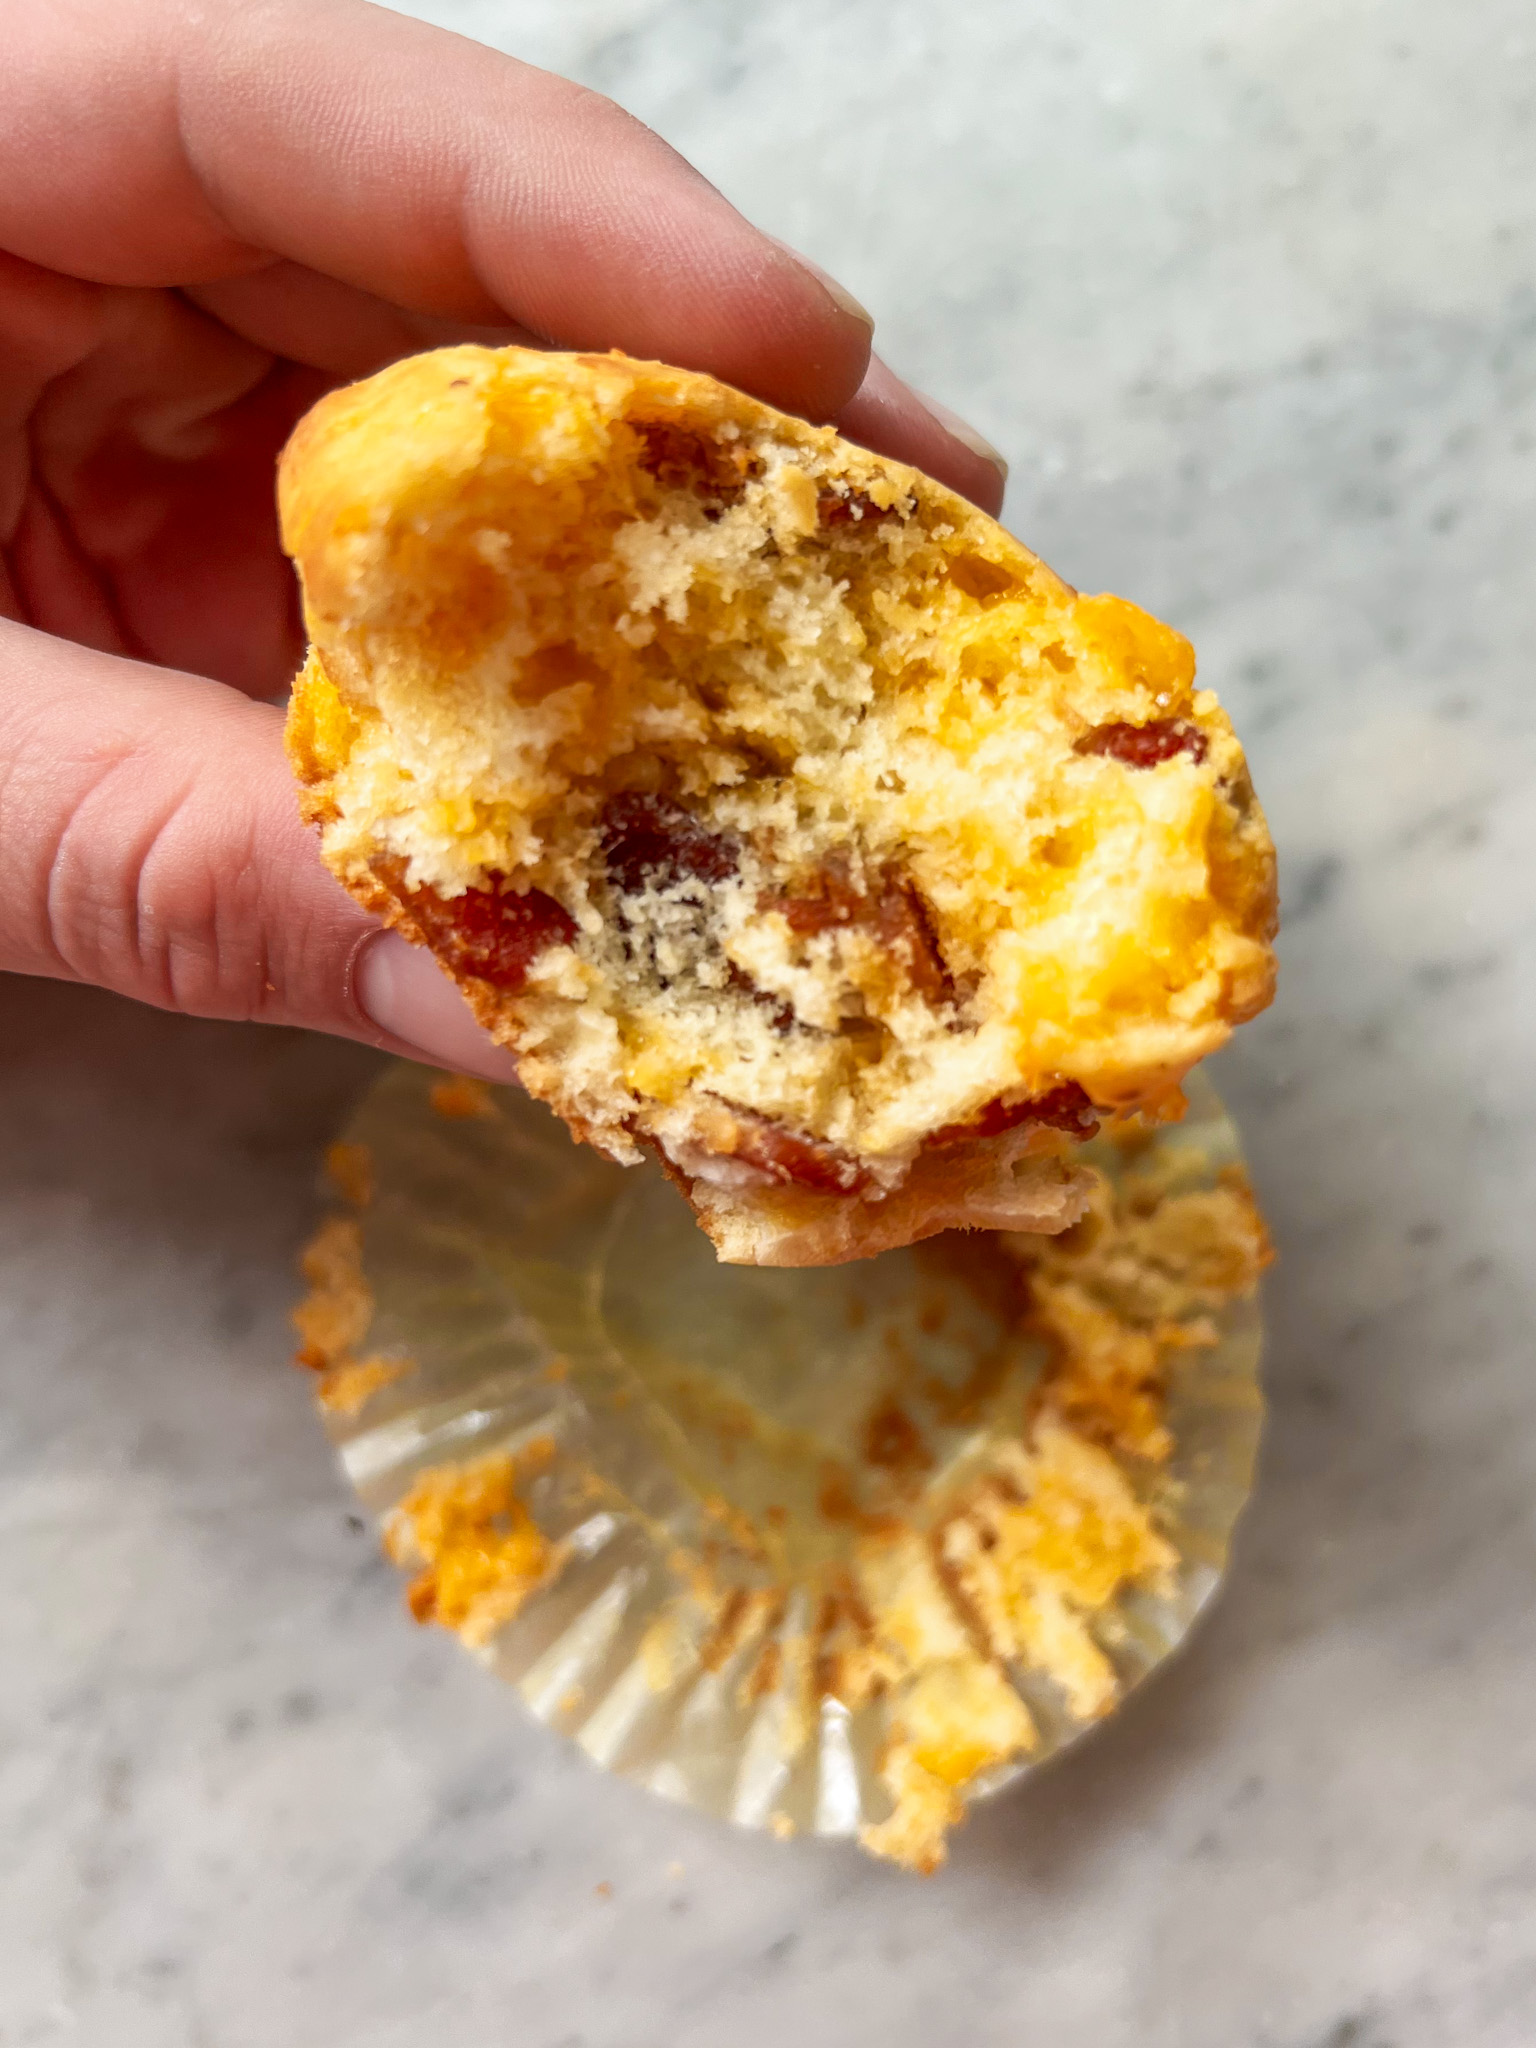 bacon cheese muffin with a bite out being held with a hand